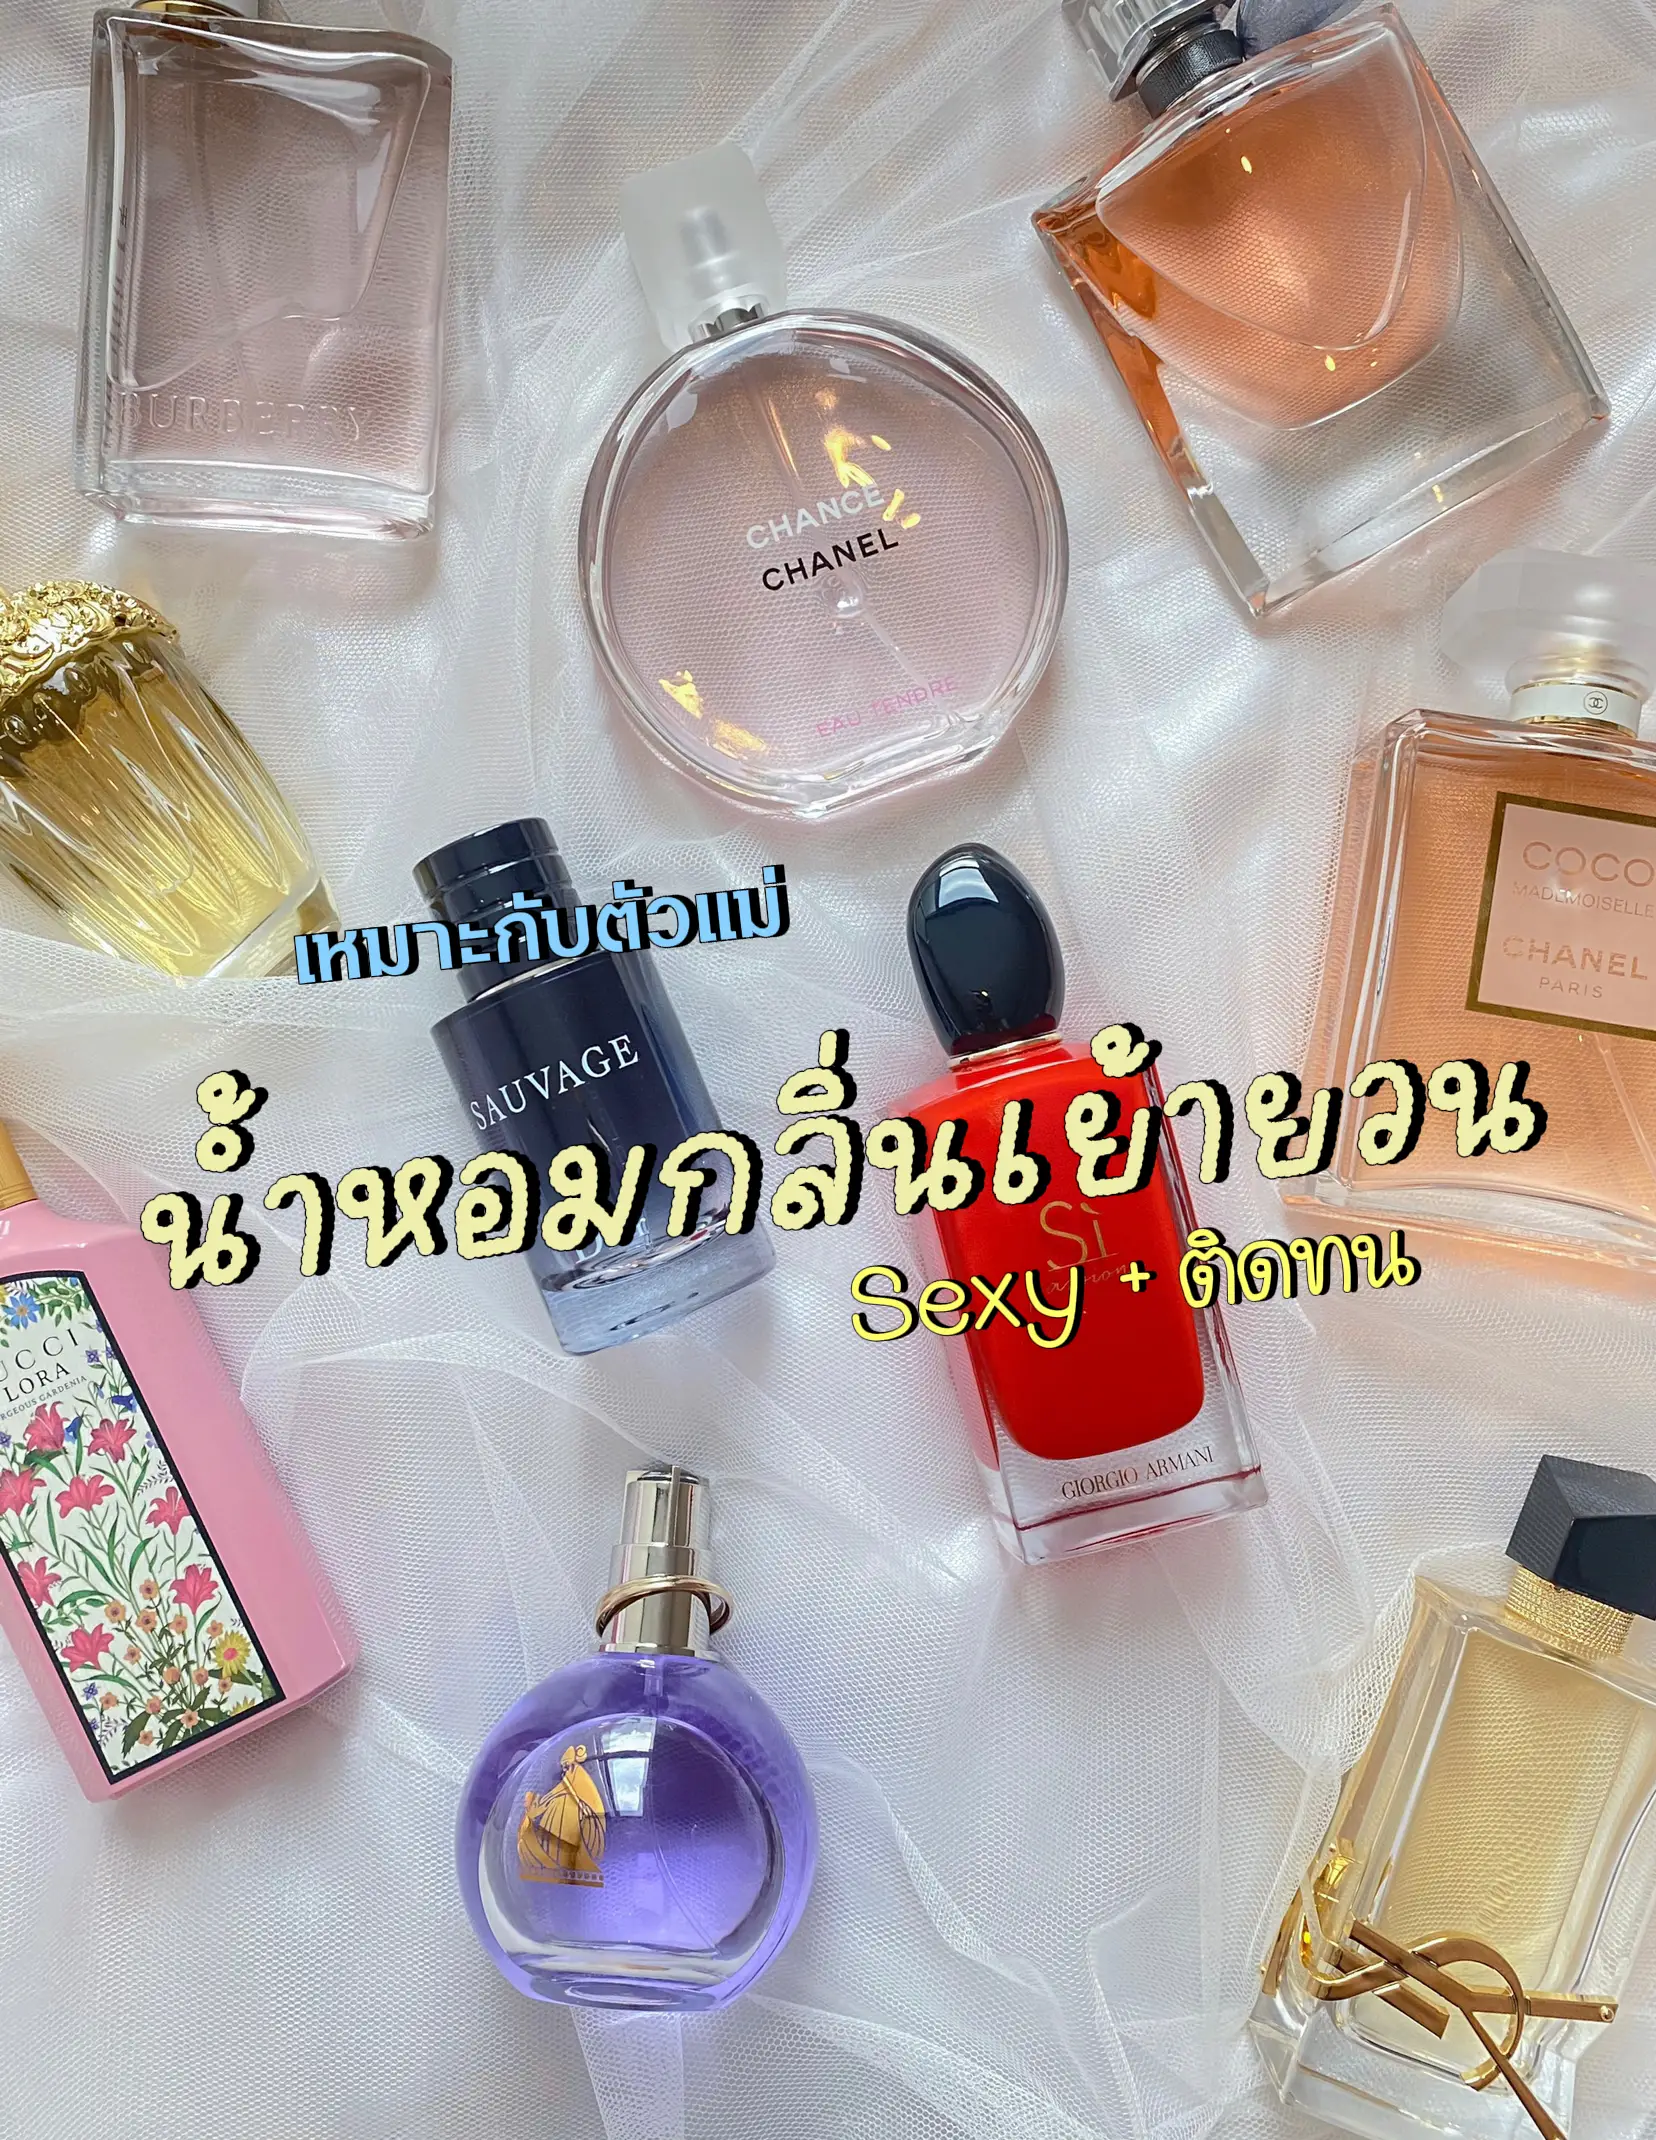 Sexy + Lasting Perfume, Gallery posted by Looknam